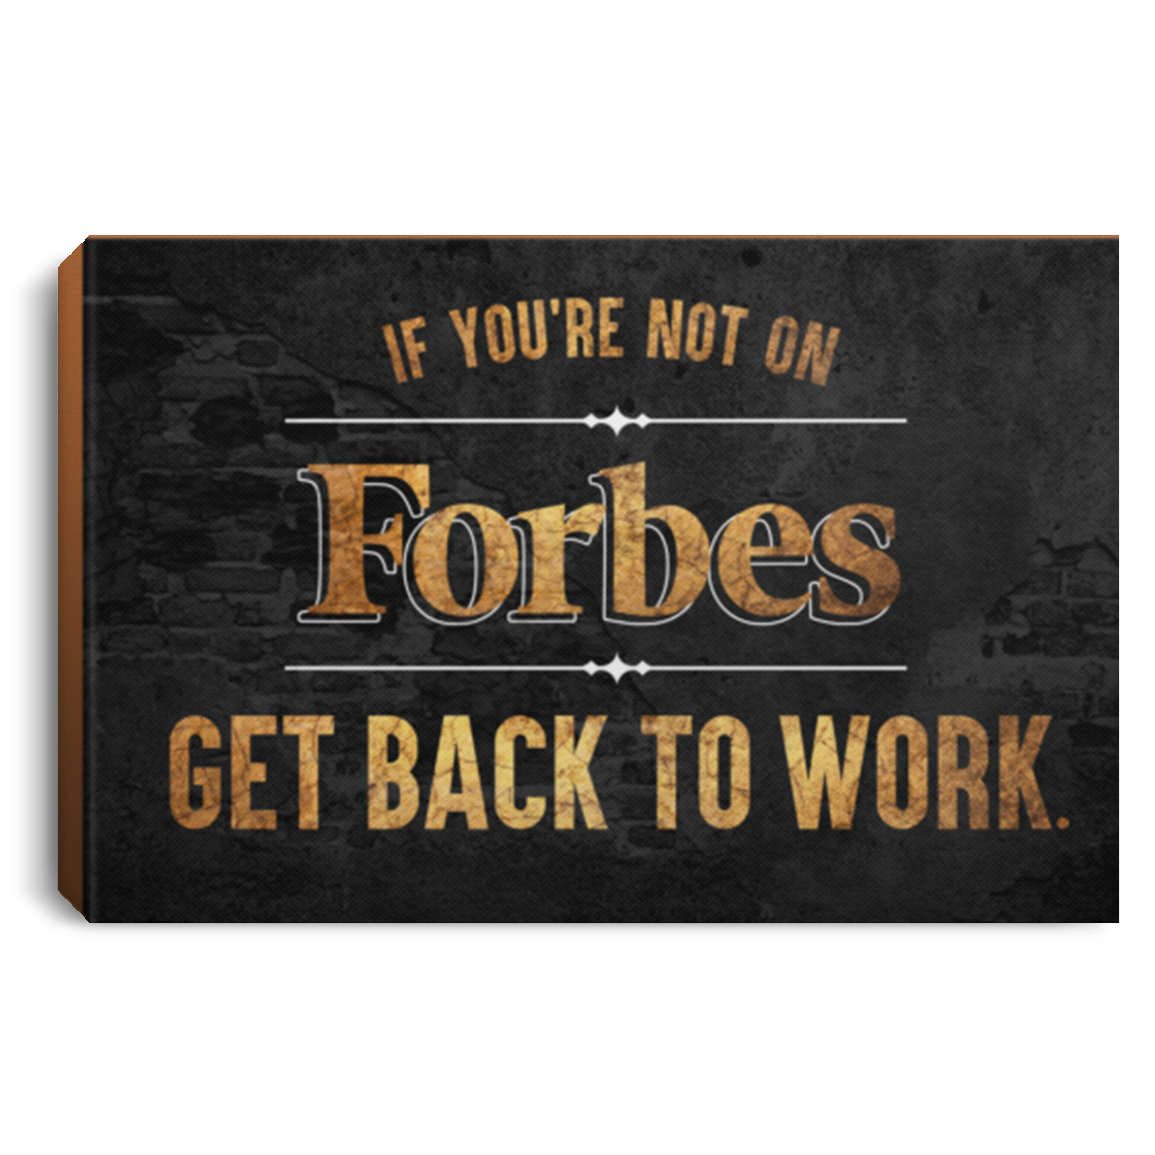 If You're Not on Forbes ...